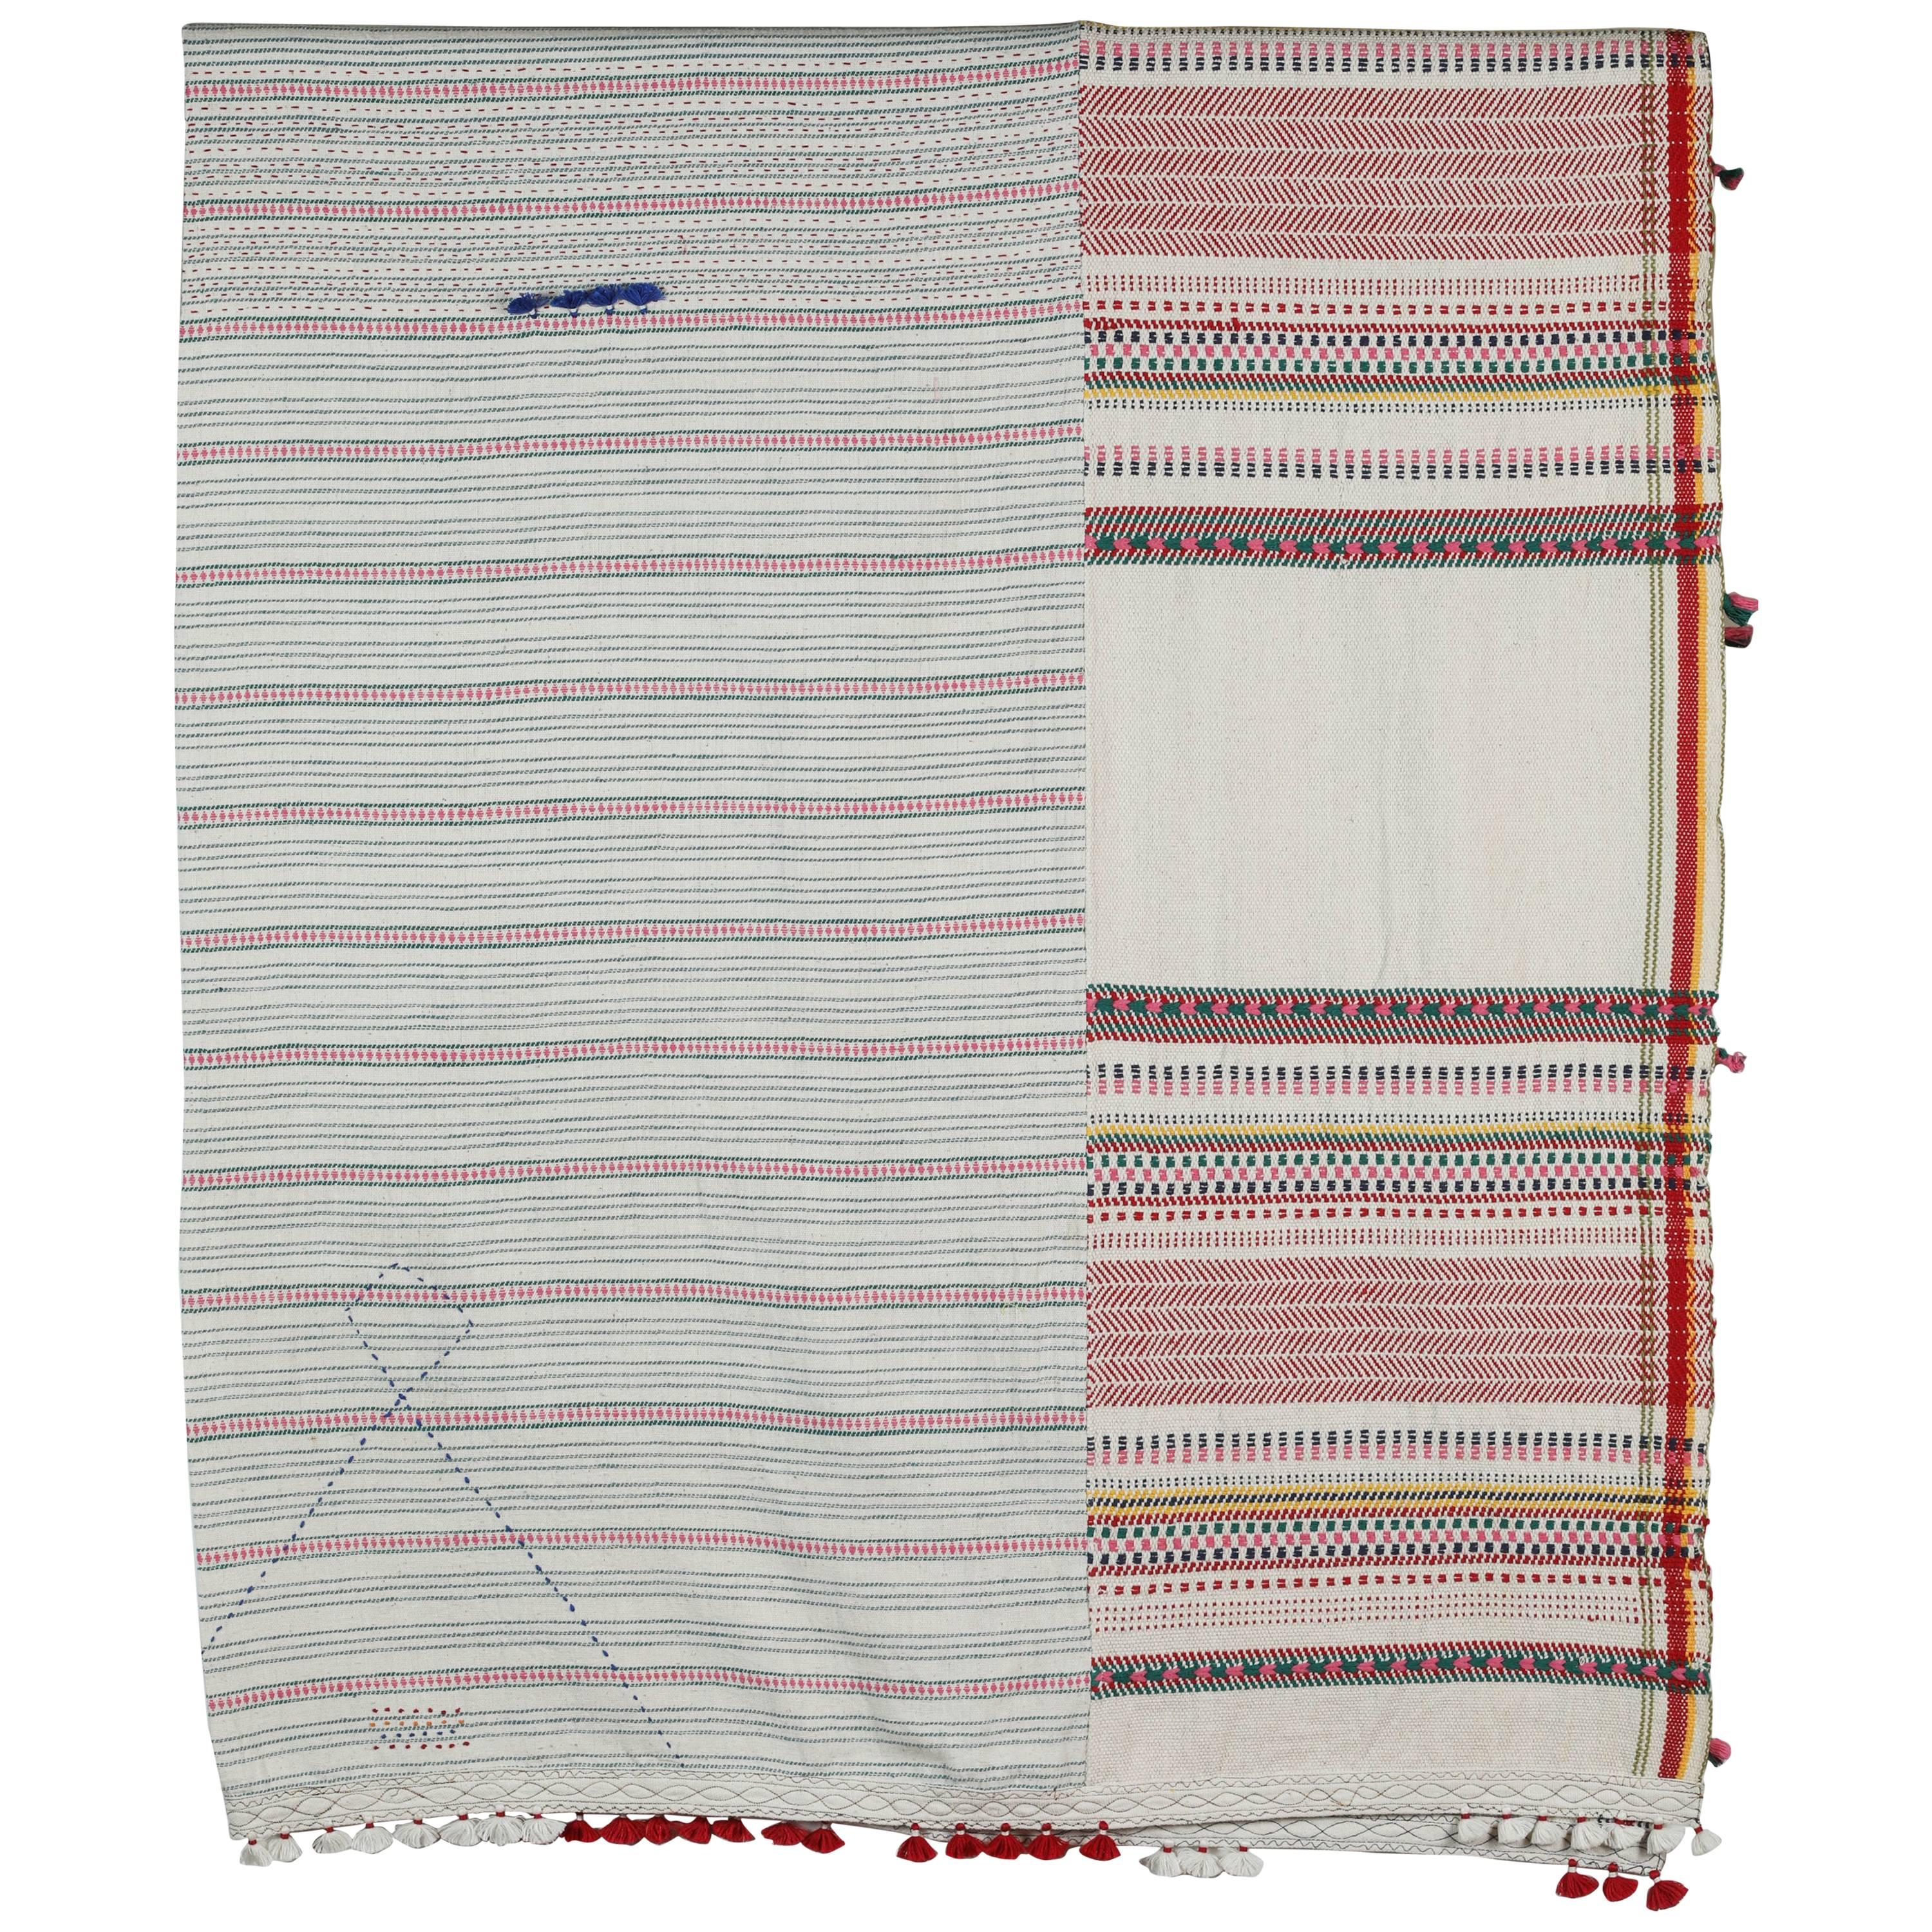 Injiri "Real India" Organic Cotton Bedcover For Sale